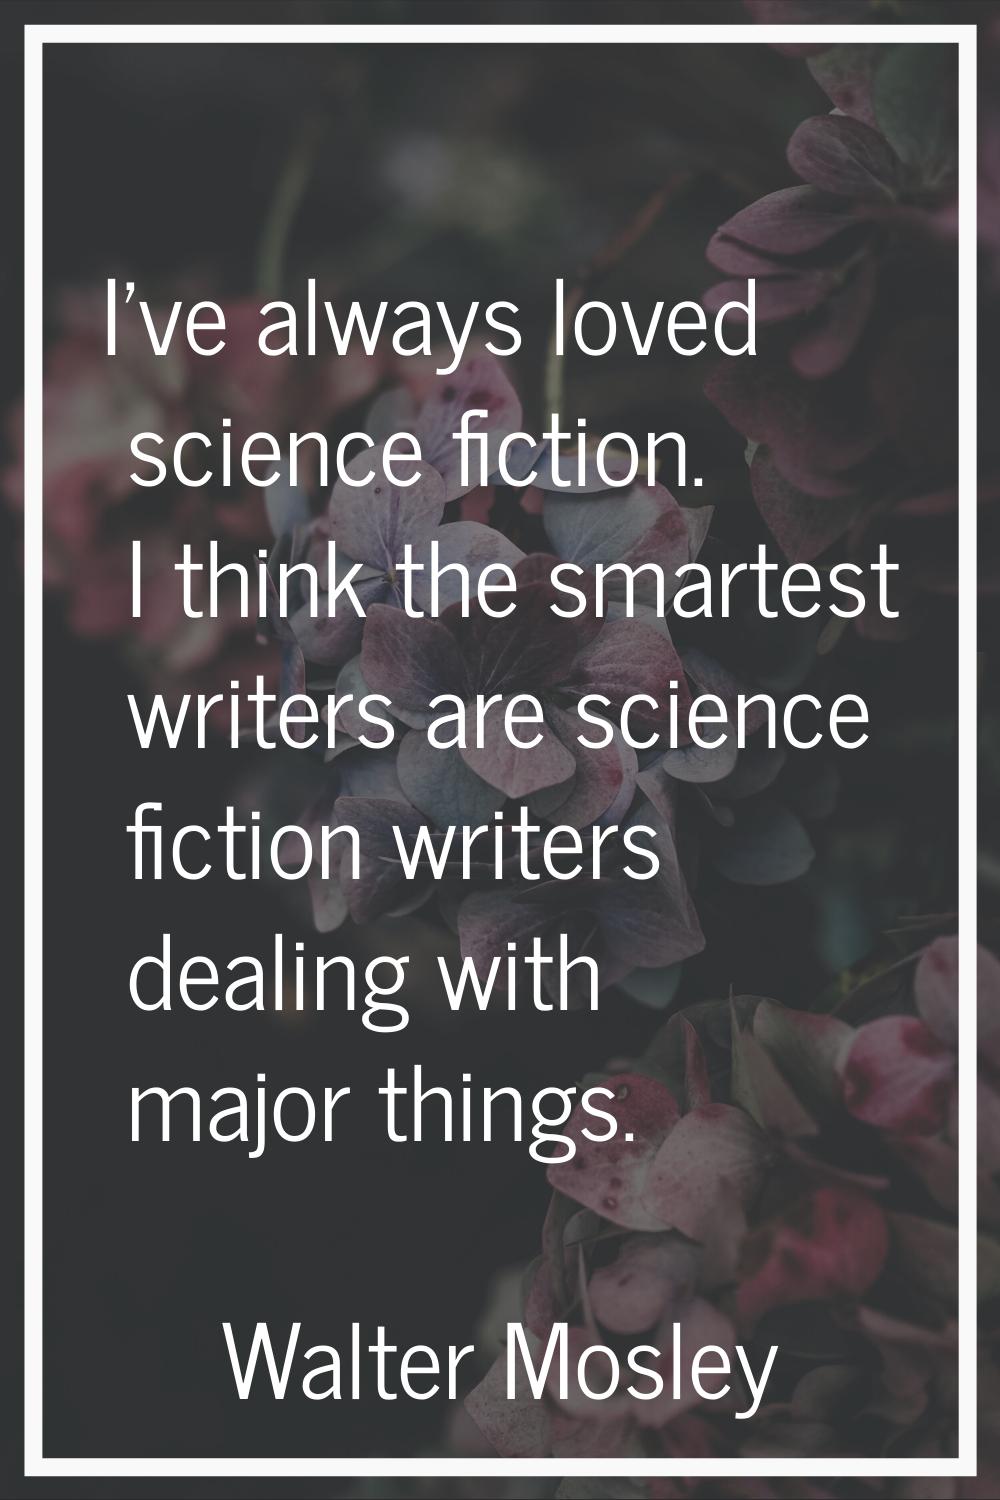 I've always loved science fiction. I think the smartest writers are science fiction writers dealing